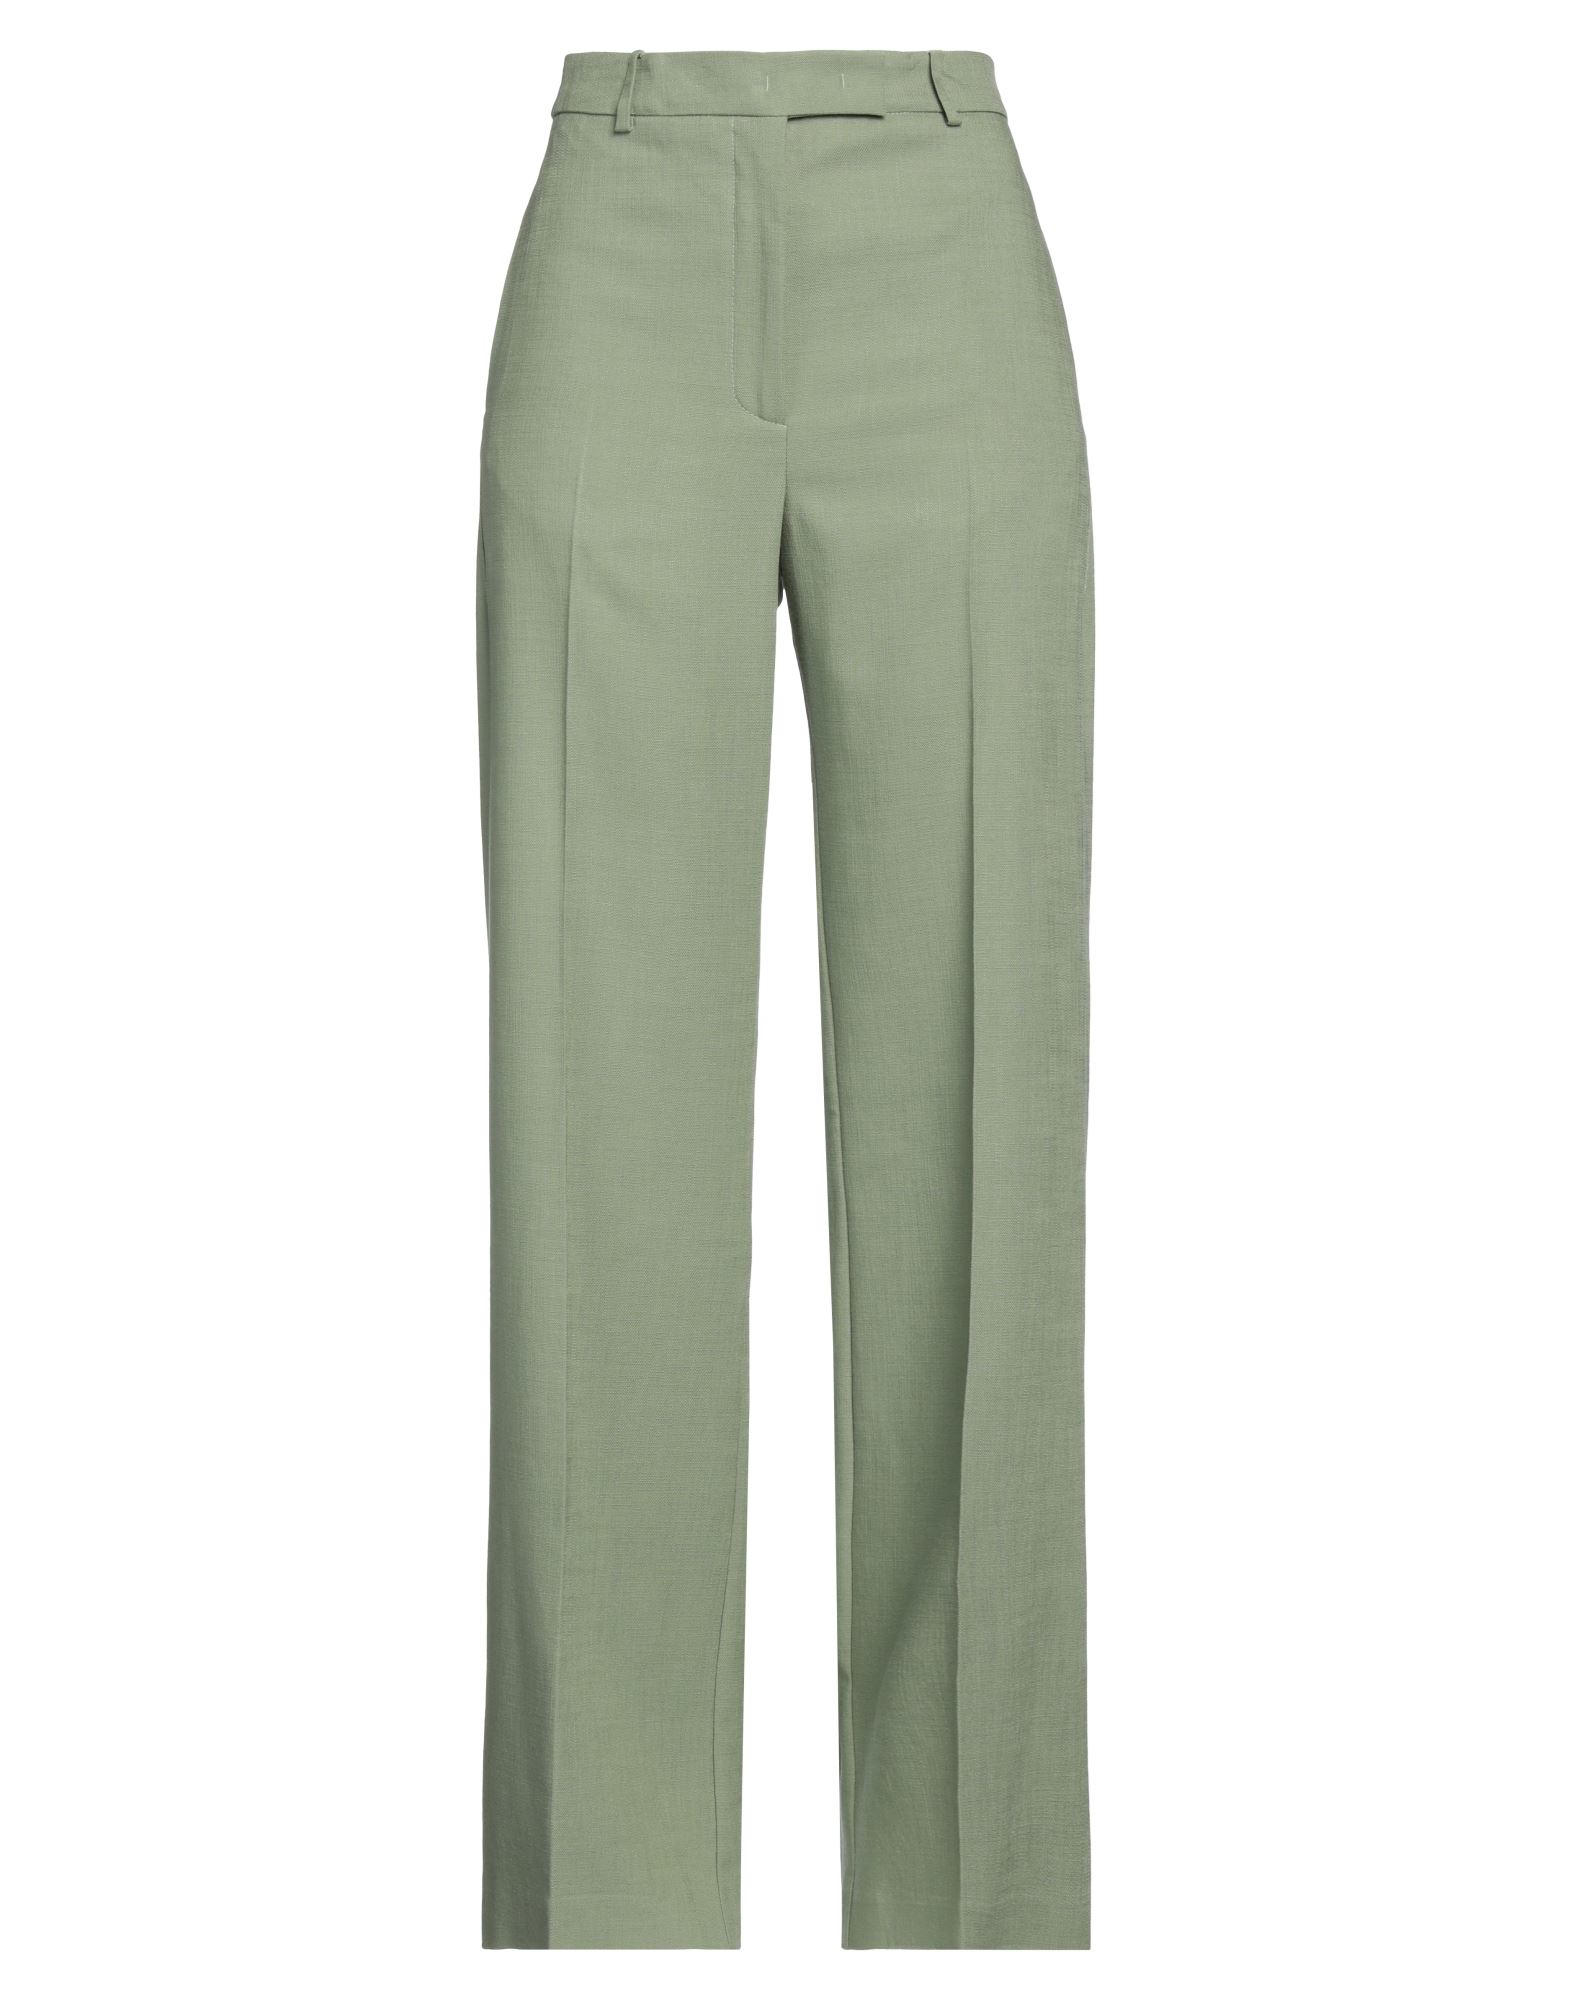 Attic And Barn Pants In Sage Green